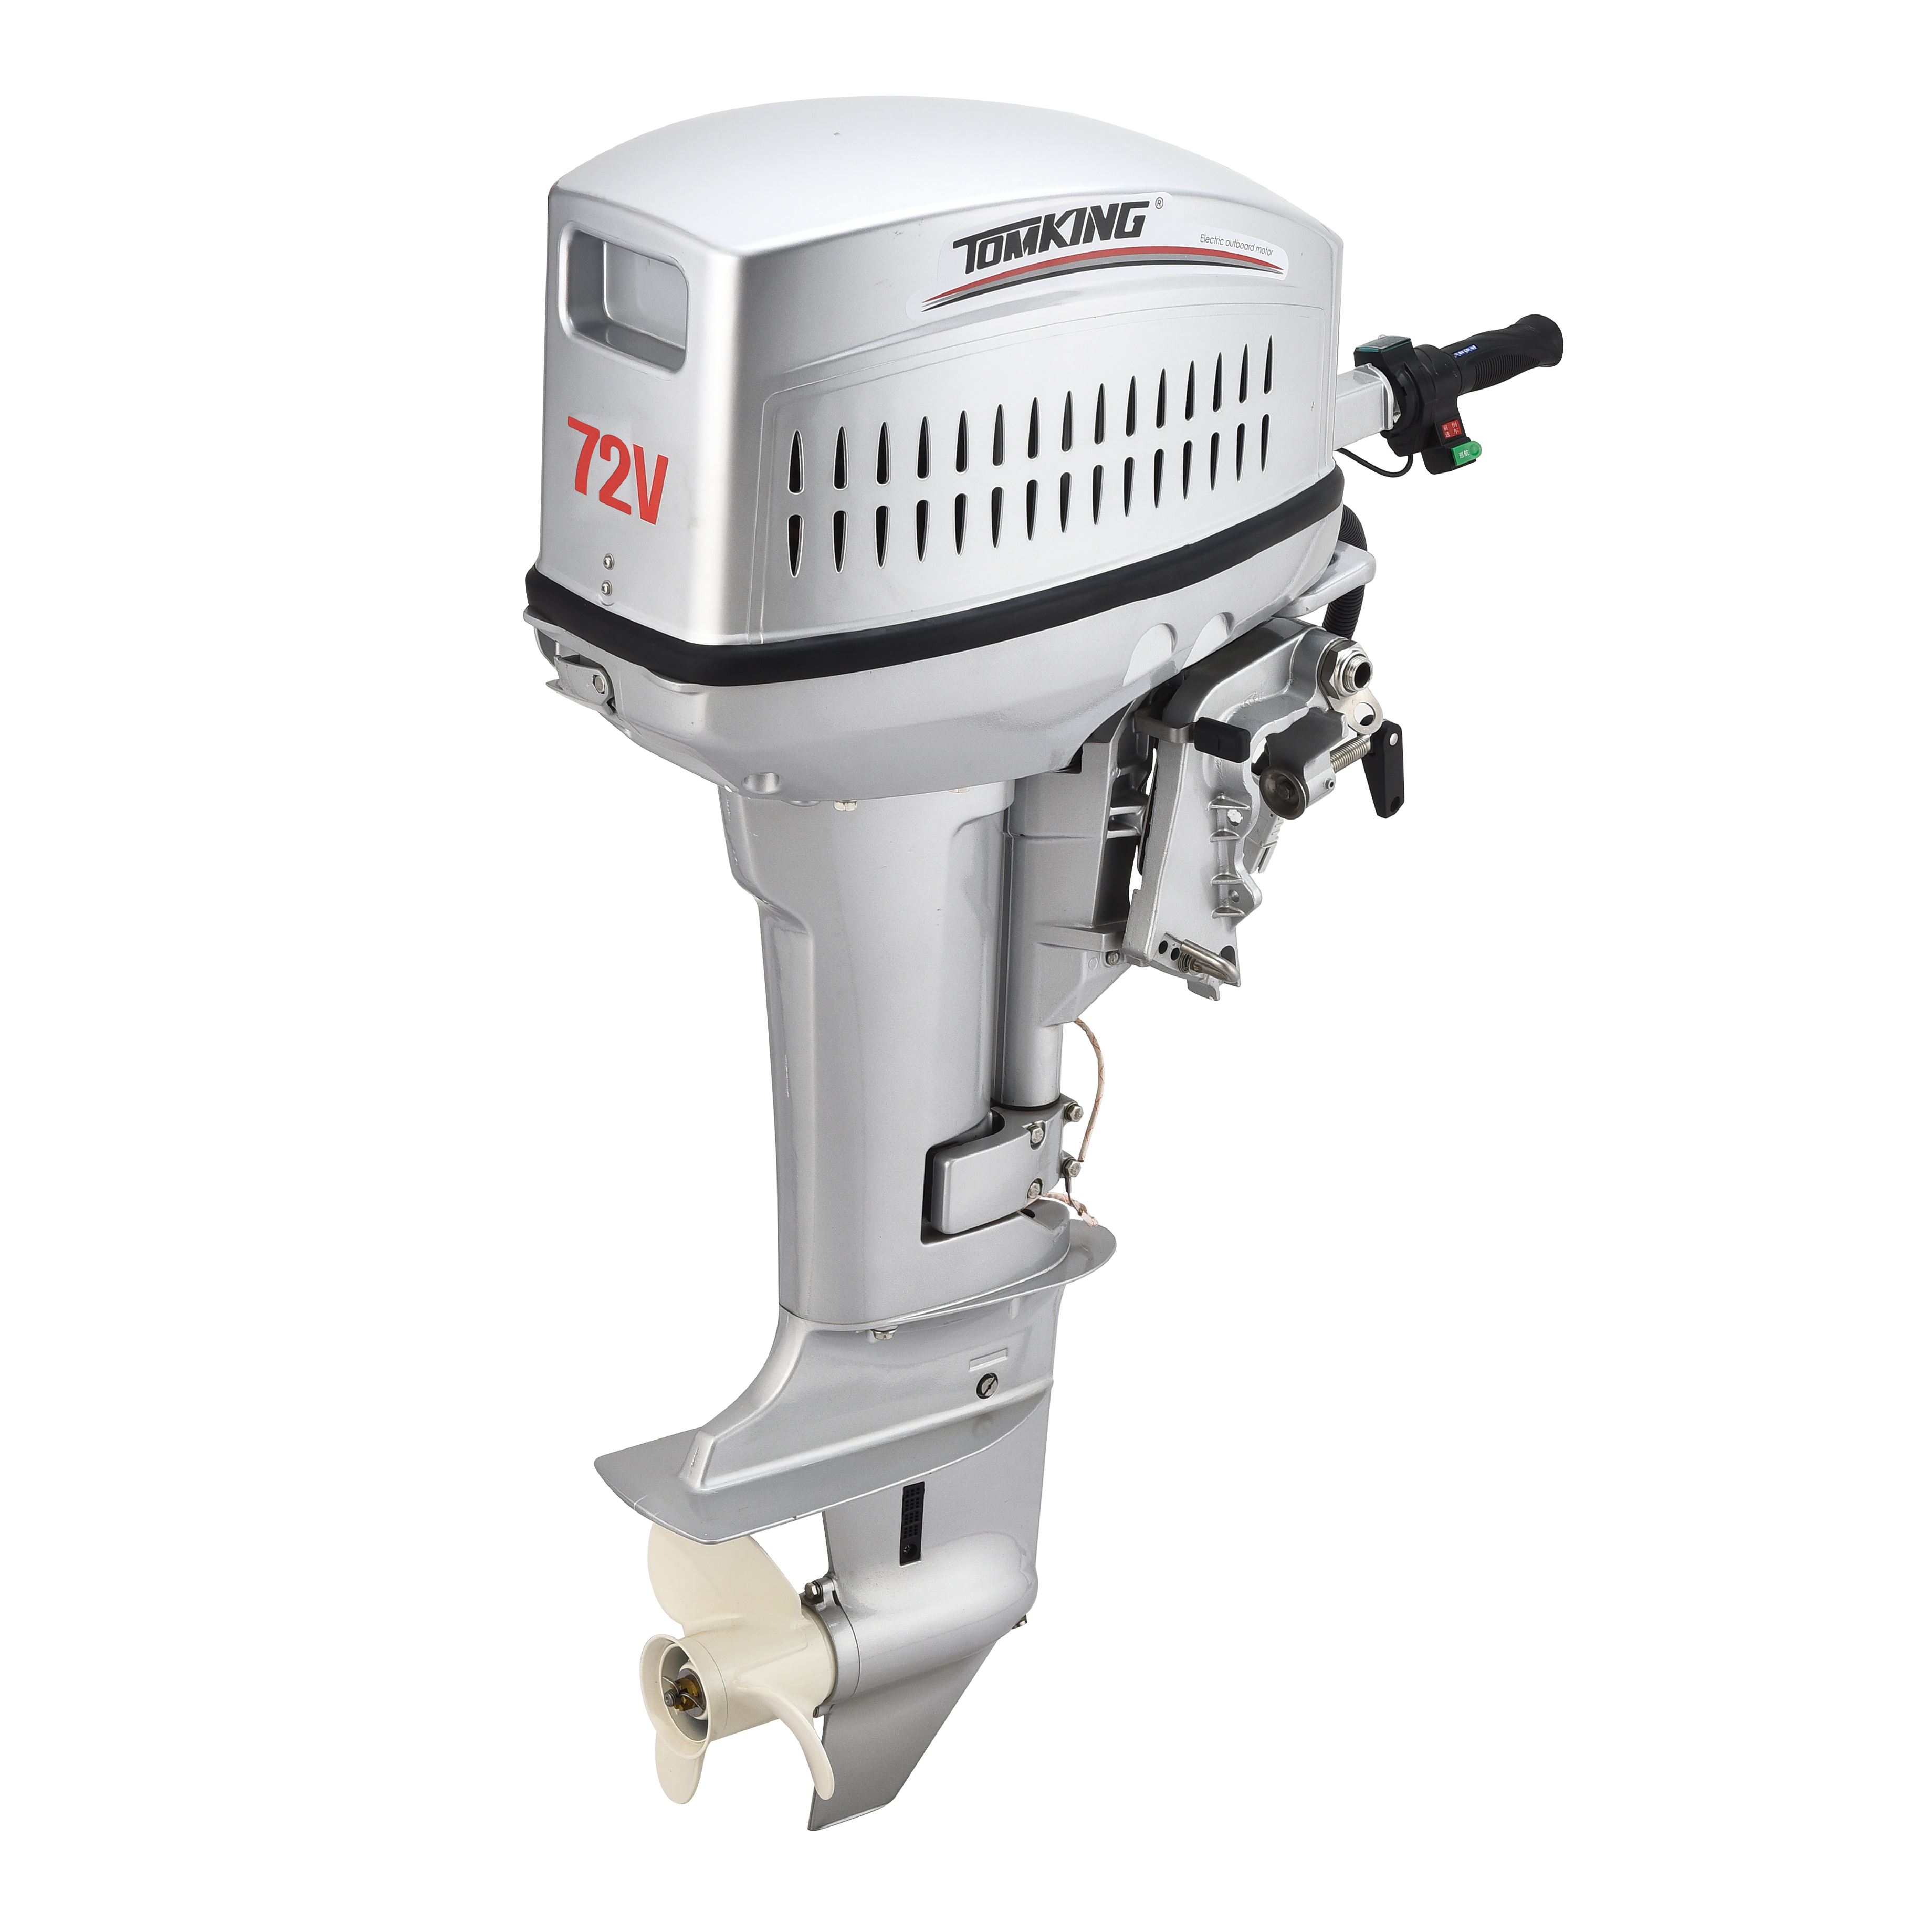 72V6kW water-cooled electric outboard motor